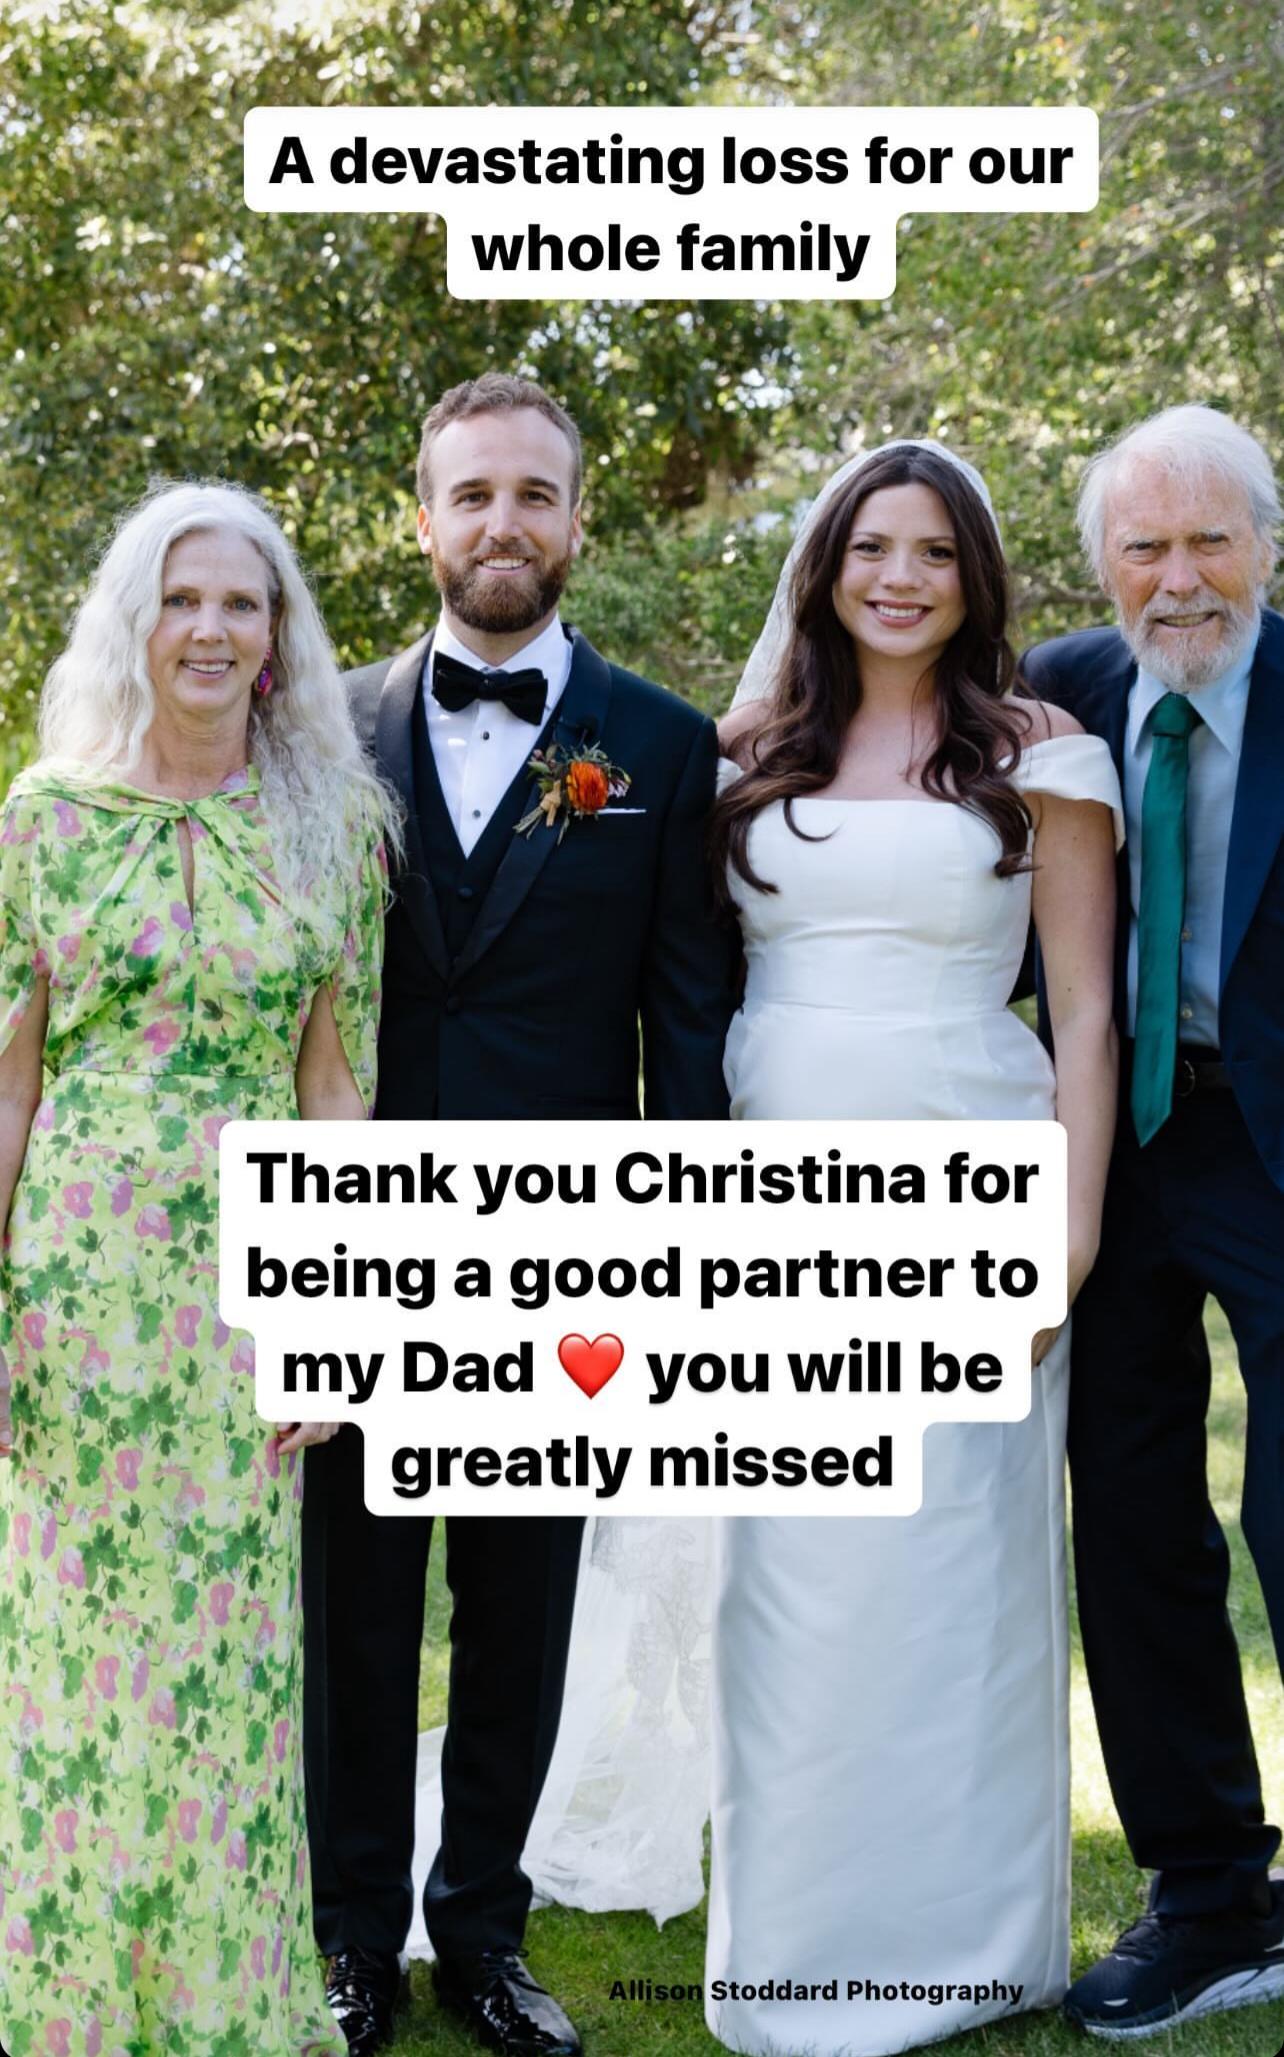 Clint Eastwood's daughter shares touching tribute to dad's girlfriend